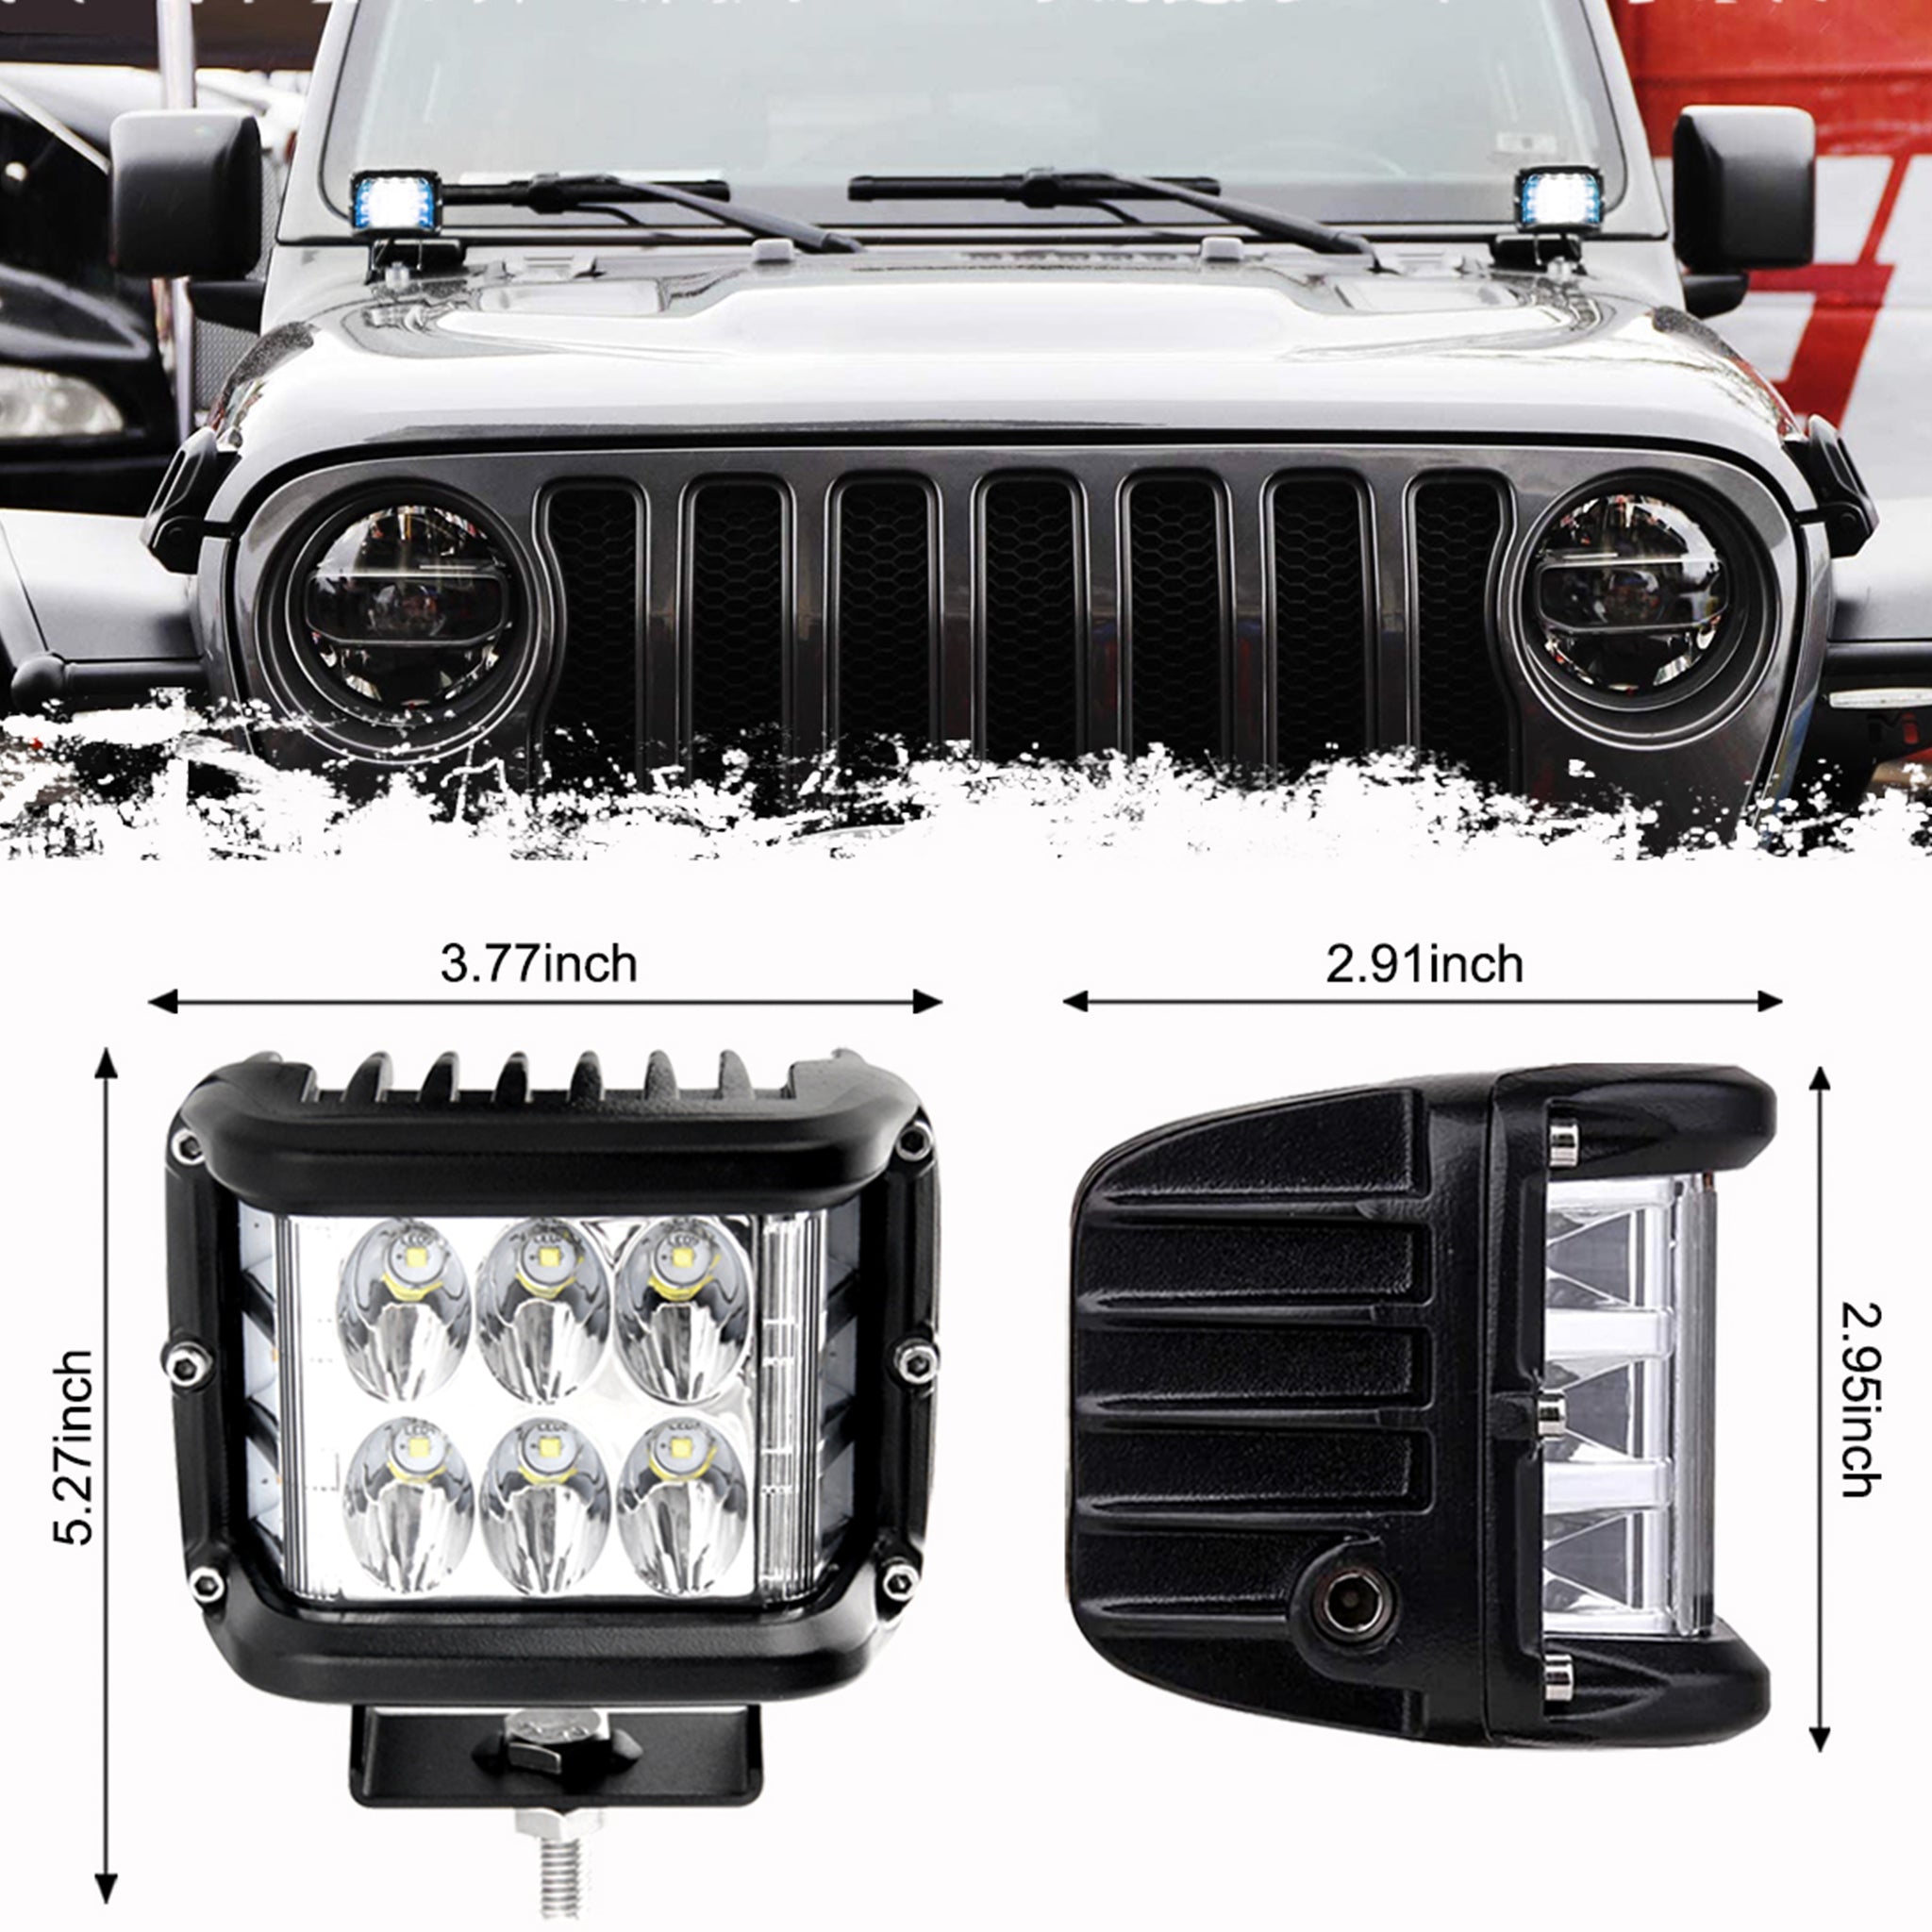 2x 4INCH 60W Side Shooter LED WORK LIGHT BAR For Ford Jeep Truck Boat  Tractor